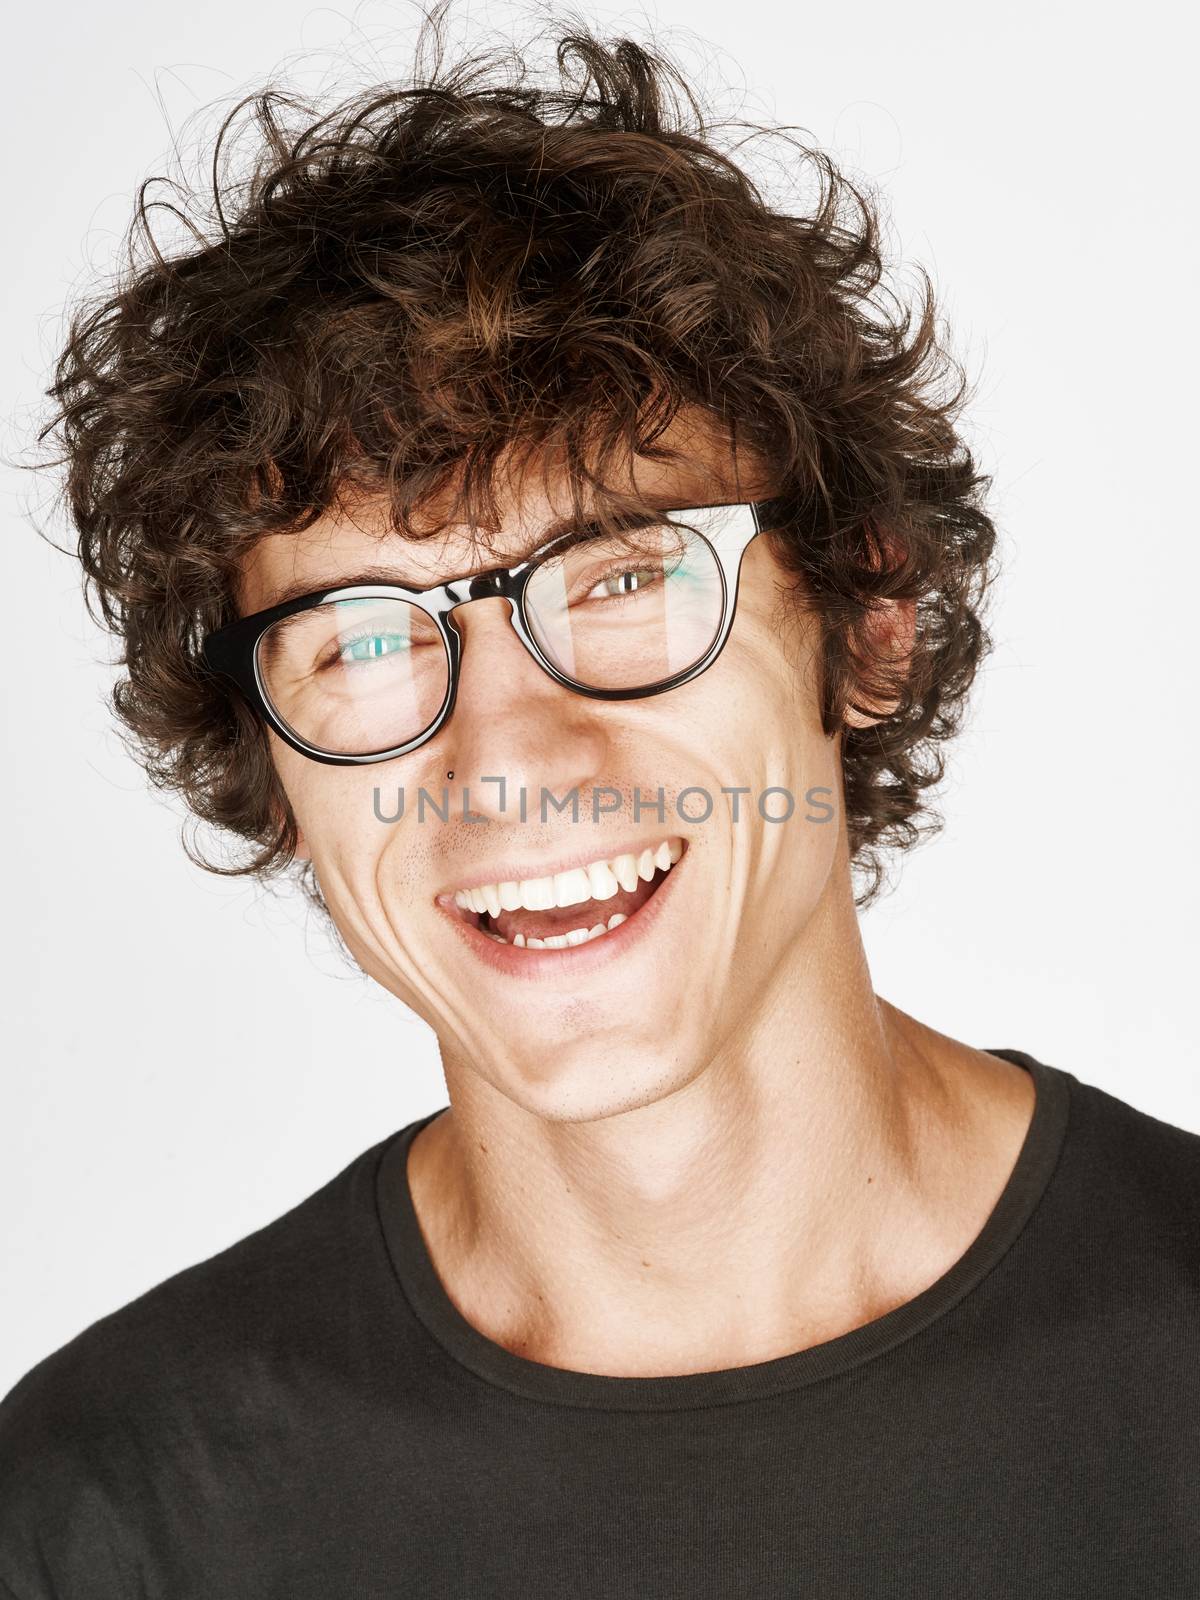 Emotional portrait of a pretty young man on white background